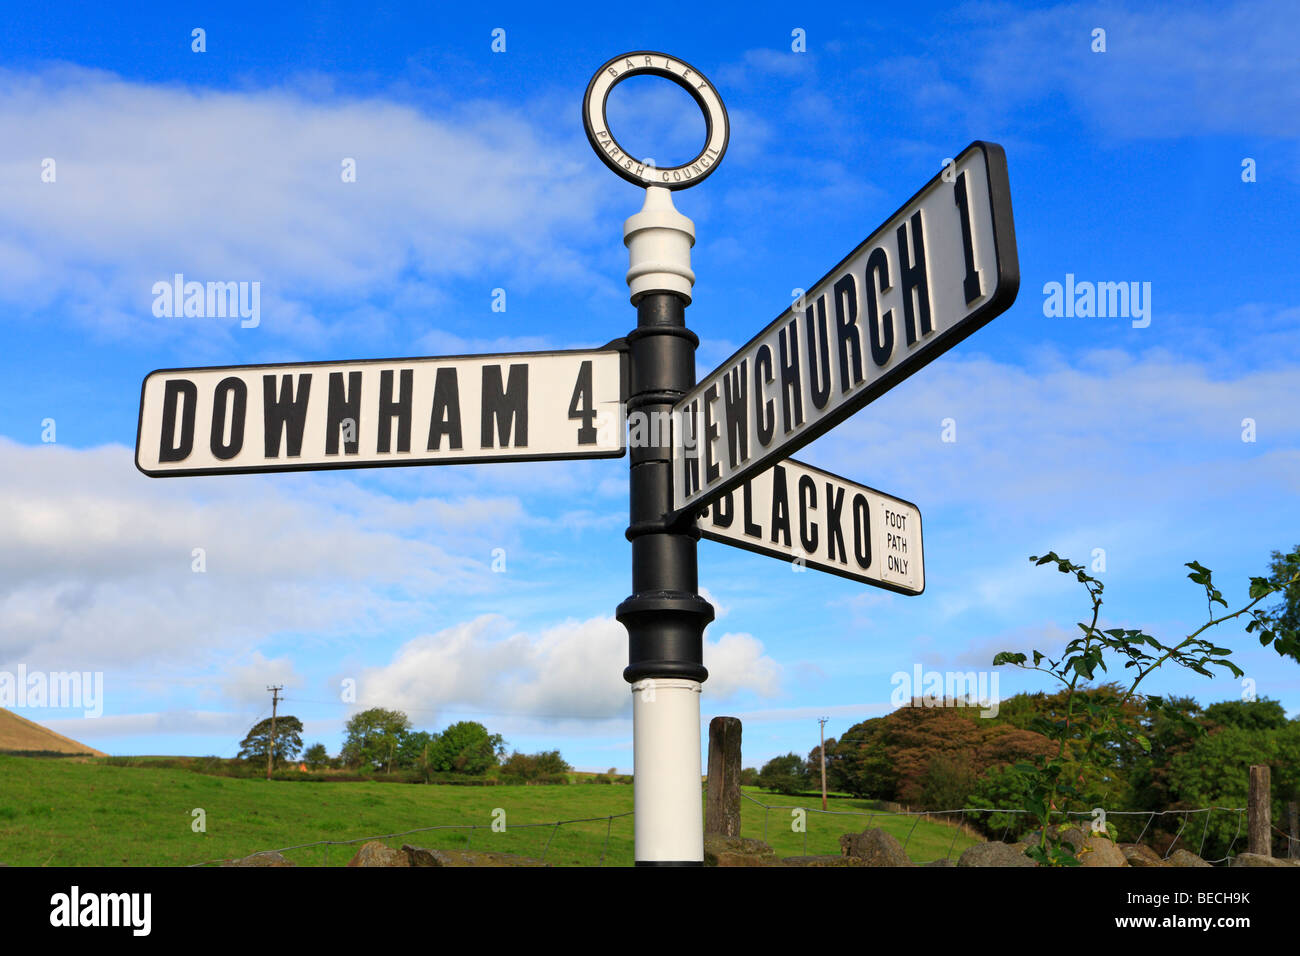 Black and white direction signpost to Downham, Newchurch and Blacko in Barley, Pendle, Lancashire, England, UK. Stock Photo